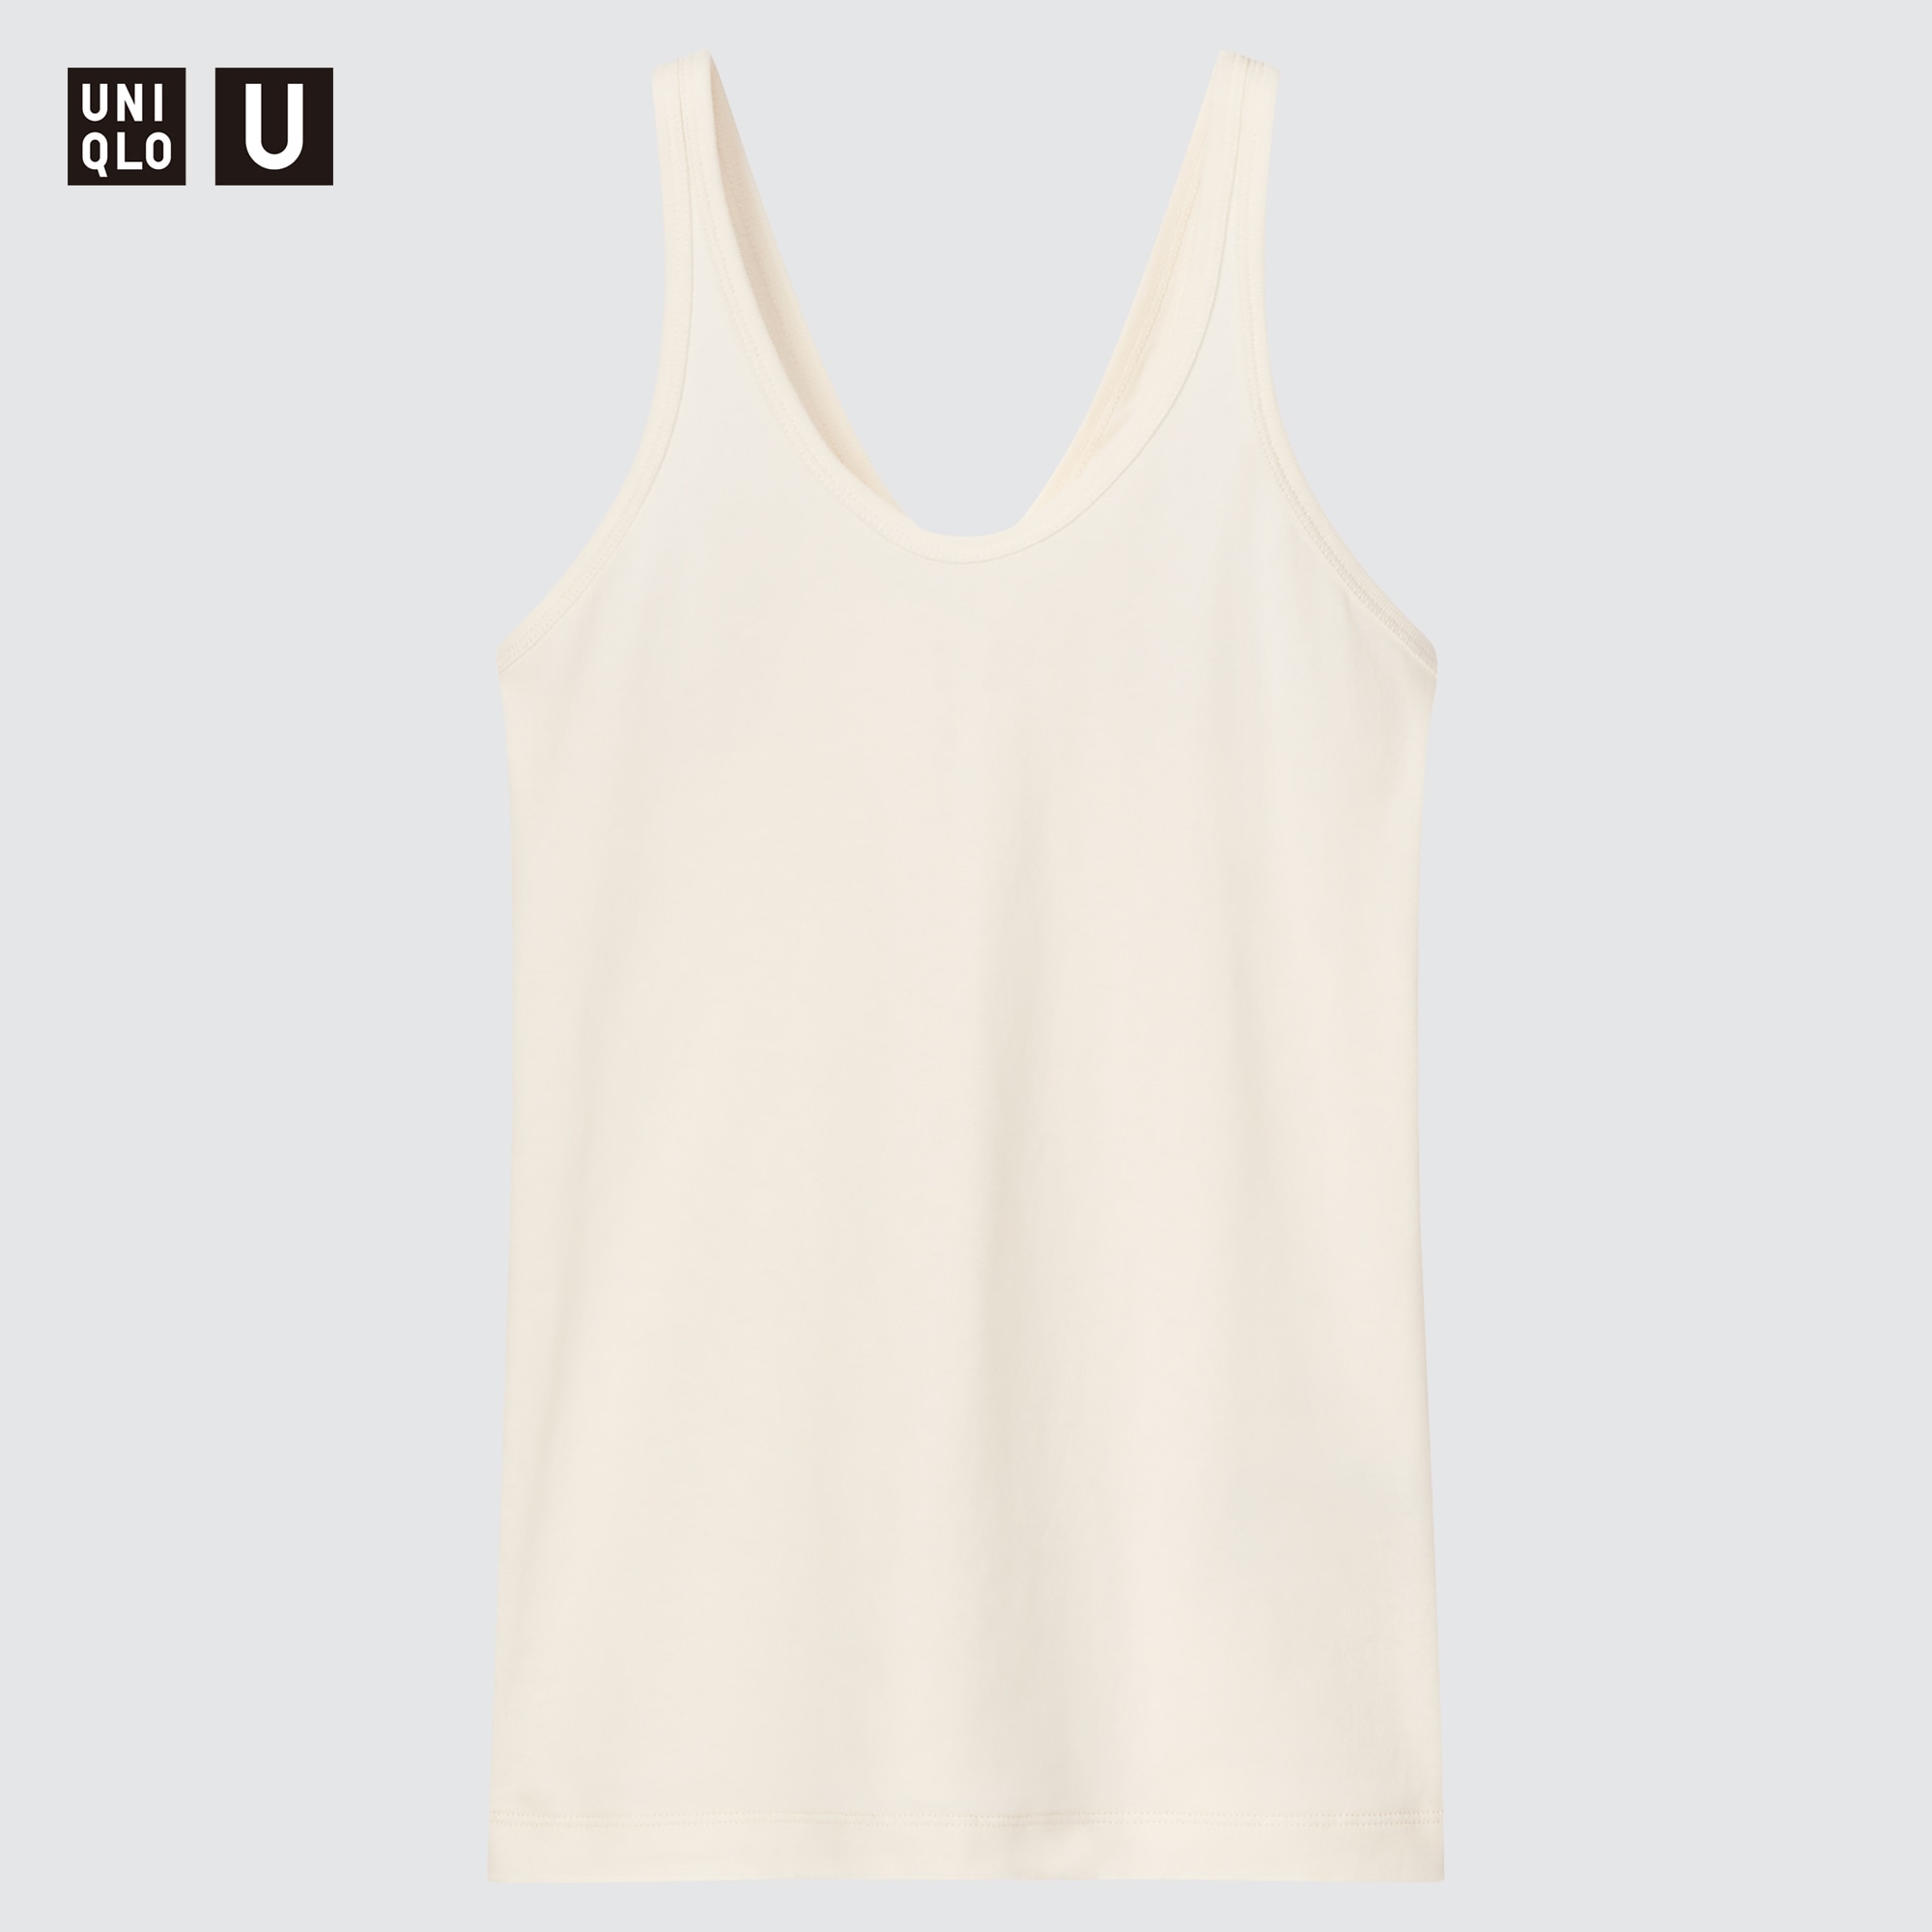 Uniqlo Mame Kurogauchi AIRism plunging bra camisole M, Women's Fashion,  Tops, Other Tops on Carousell